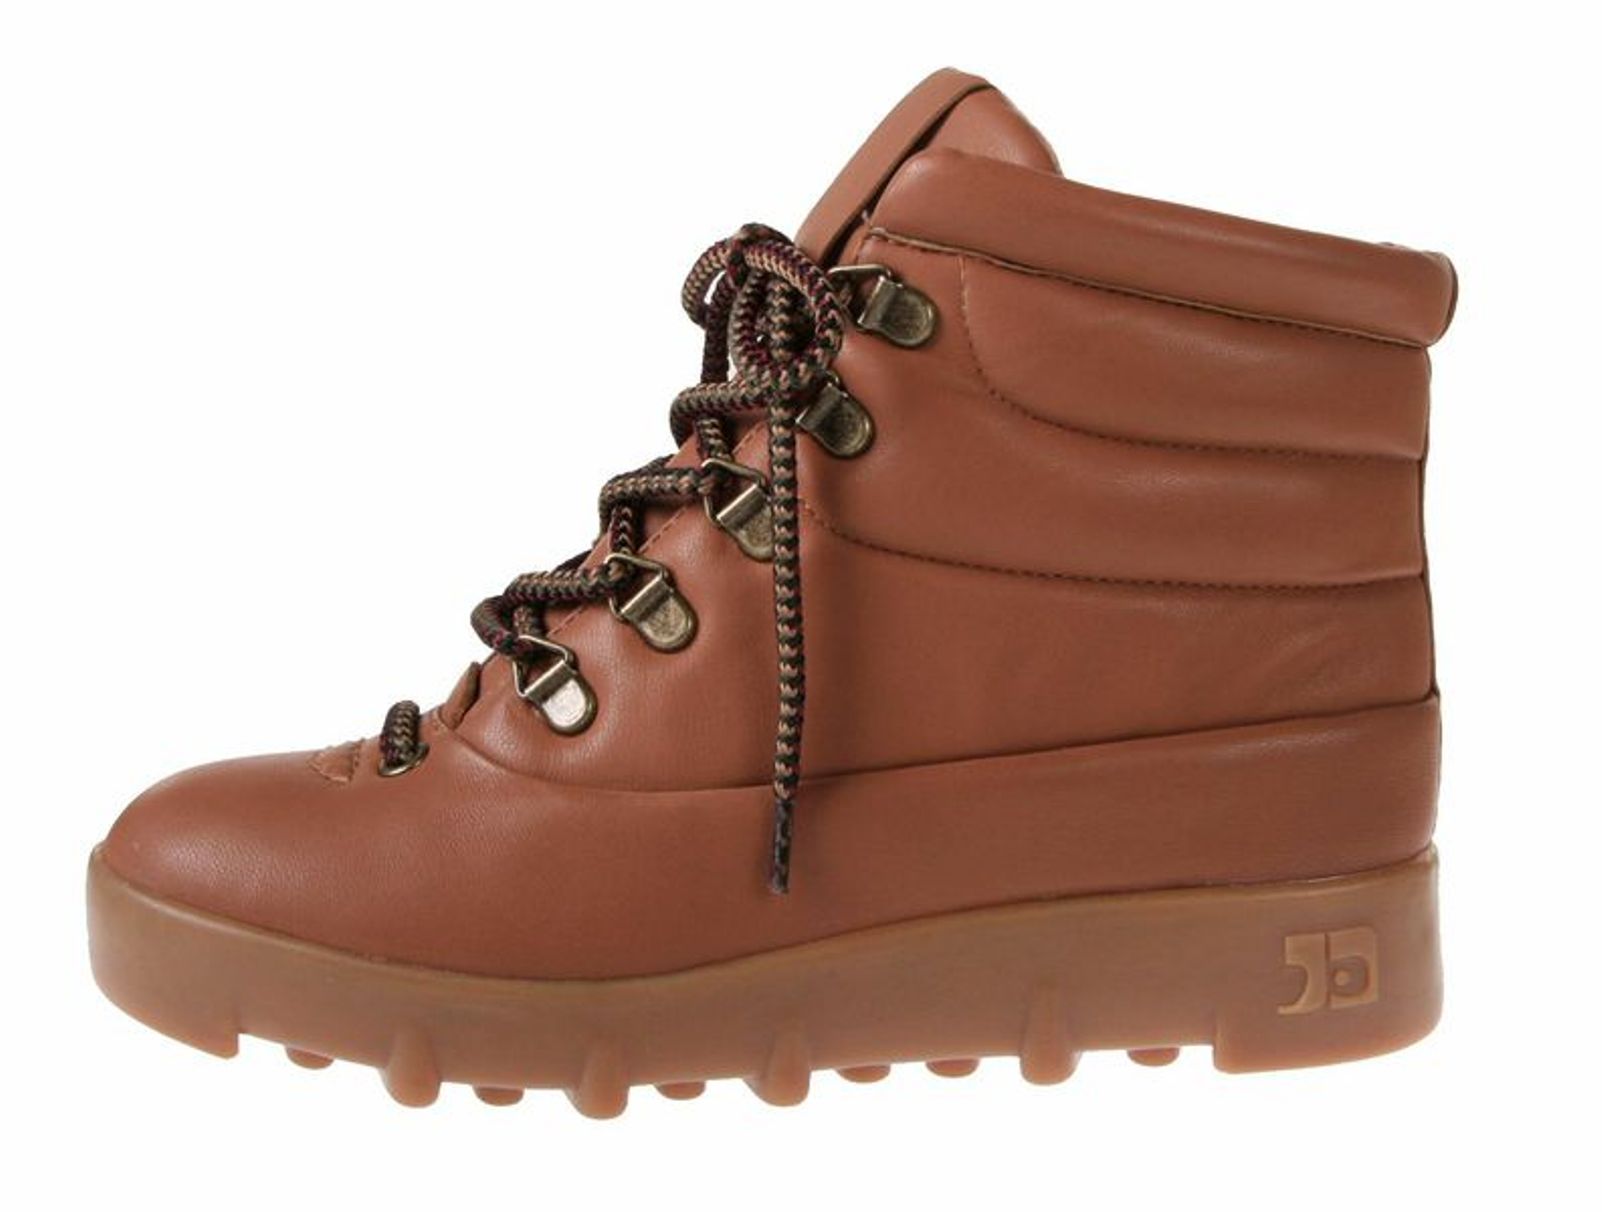 Joe's Jeans Women's Averey Camel Quilted Ankle Boot